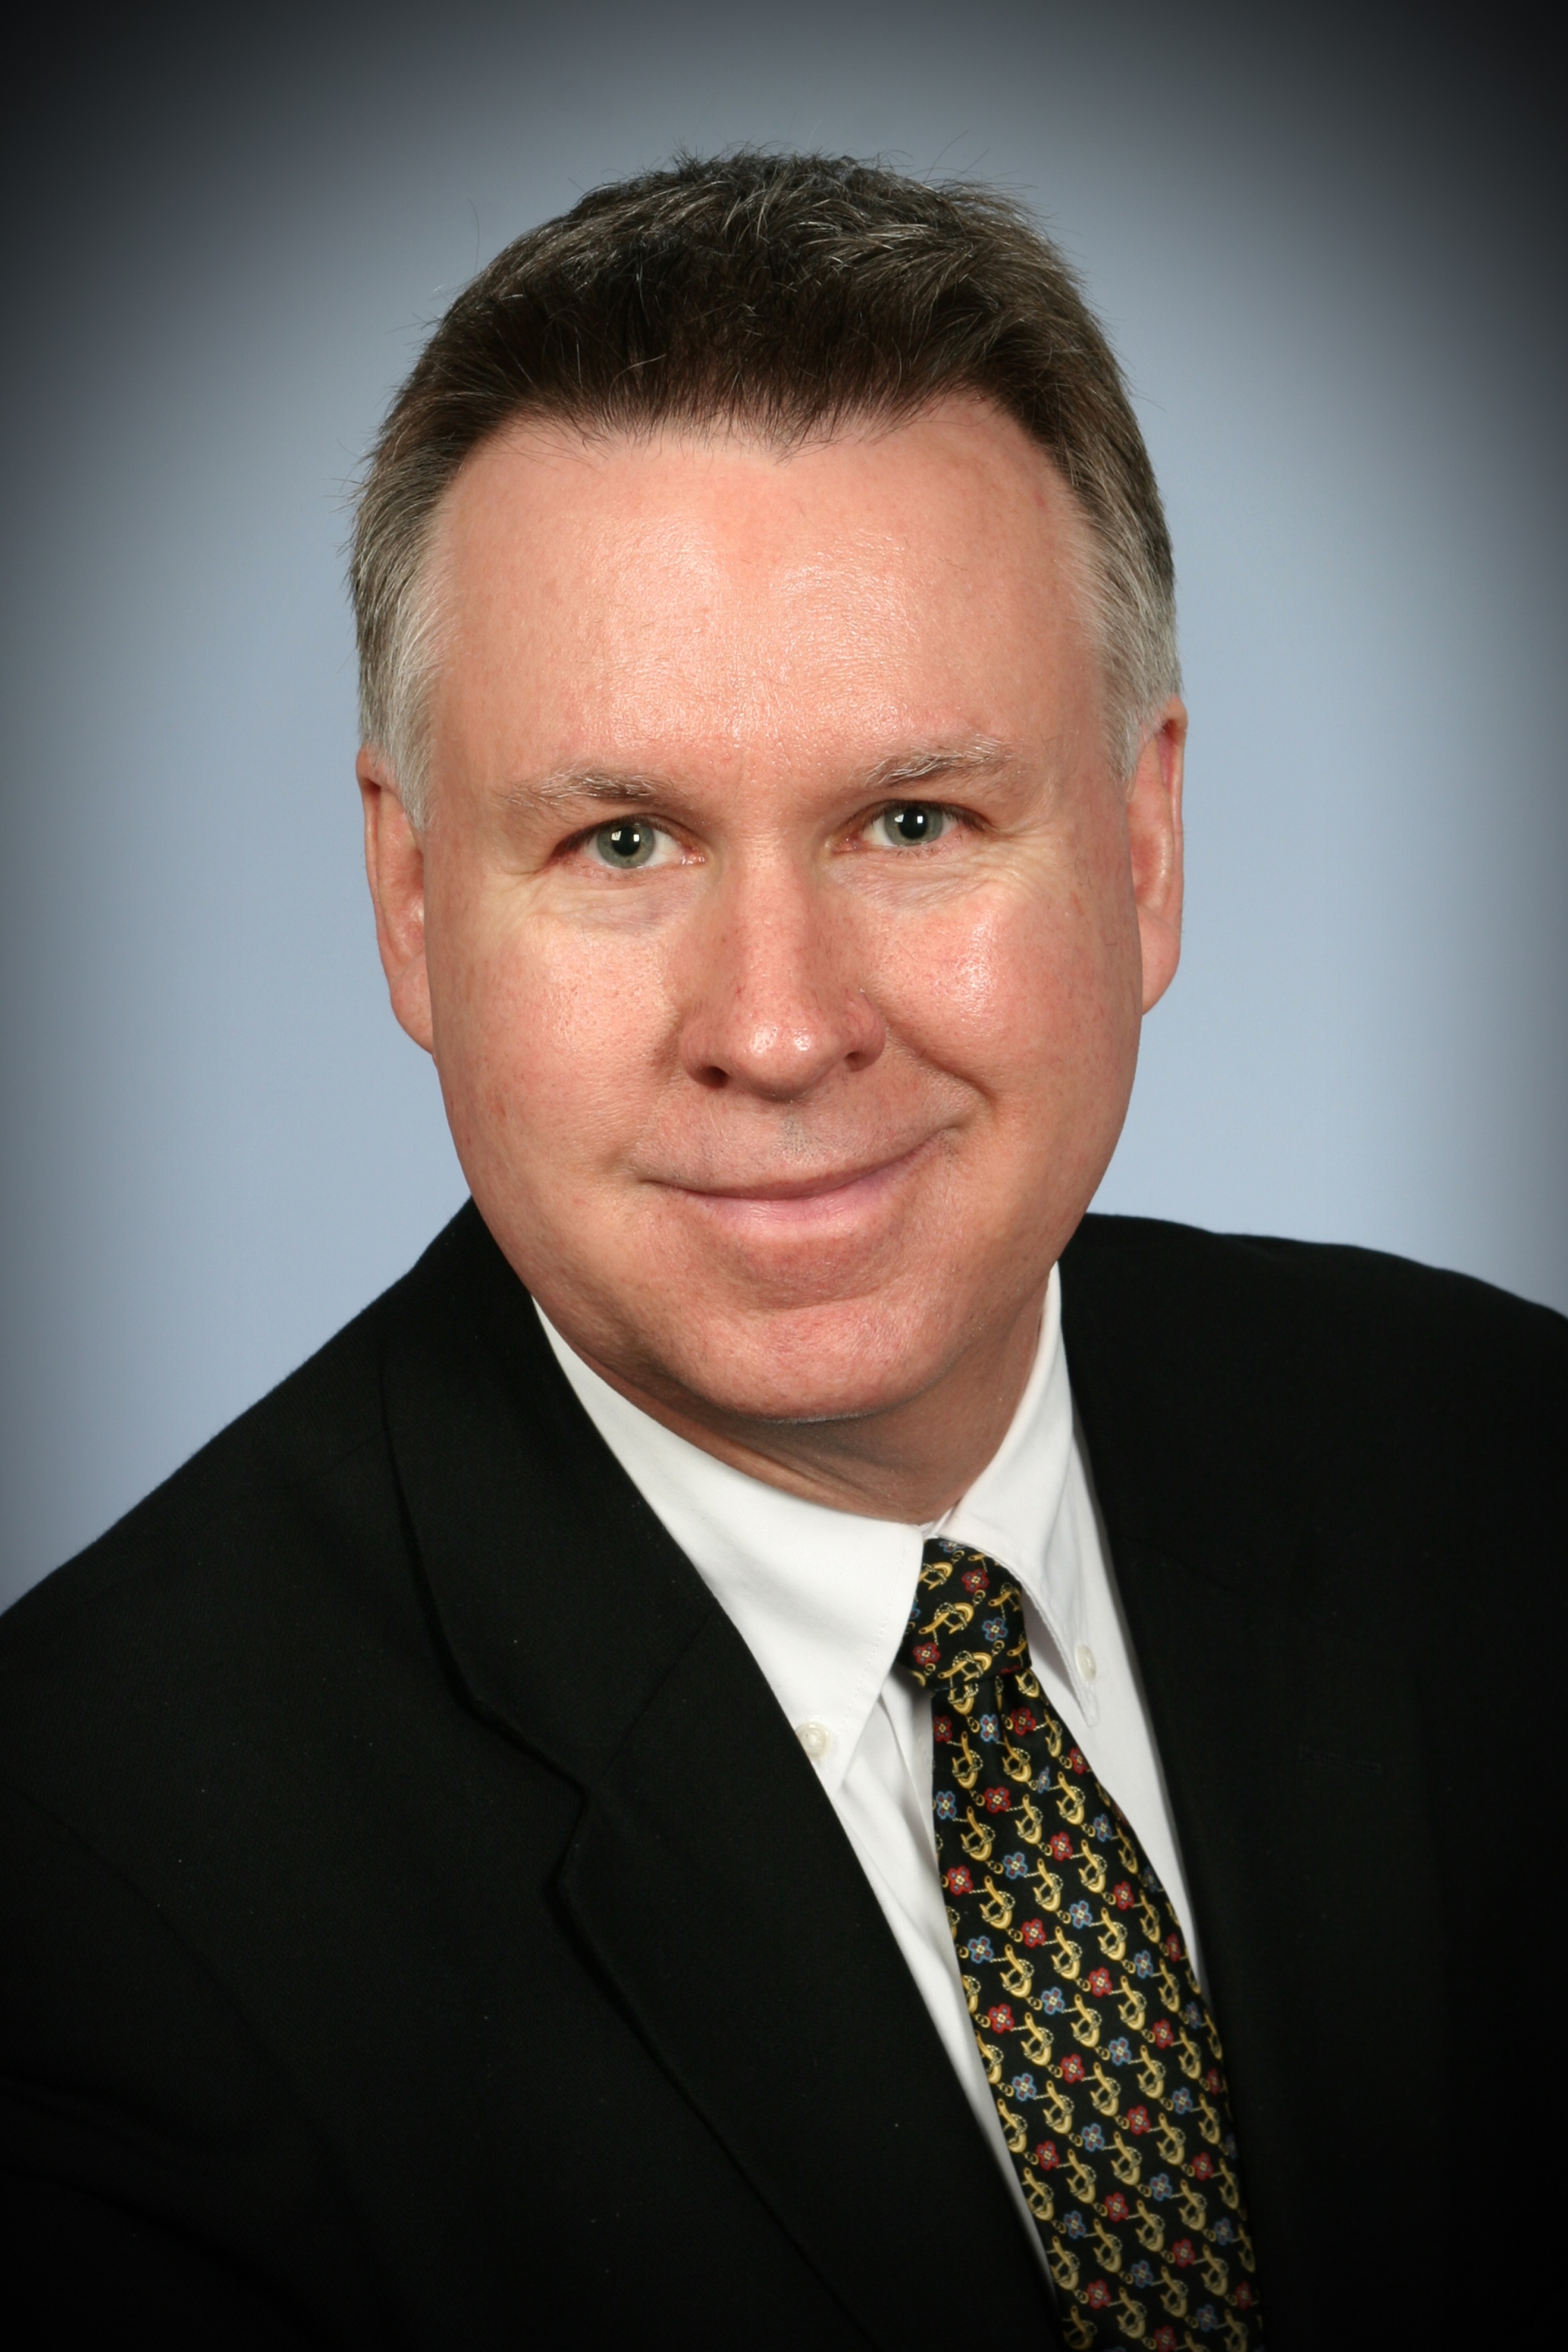 Rick Kingston, President of Regulatory and Scientific Affairs at SafetyCall International